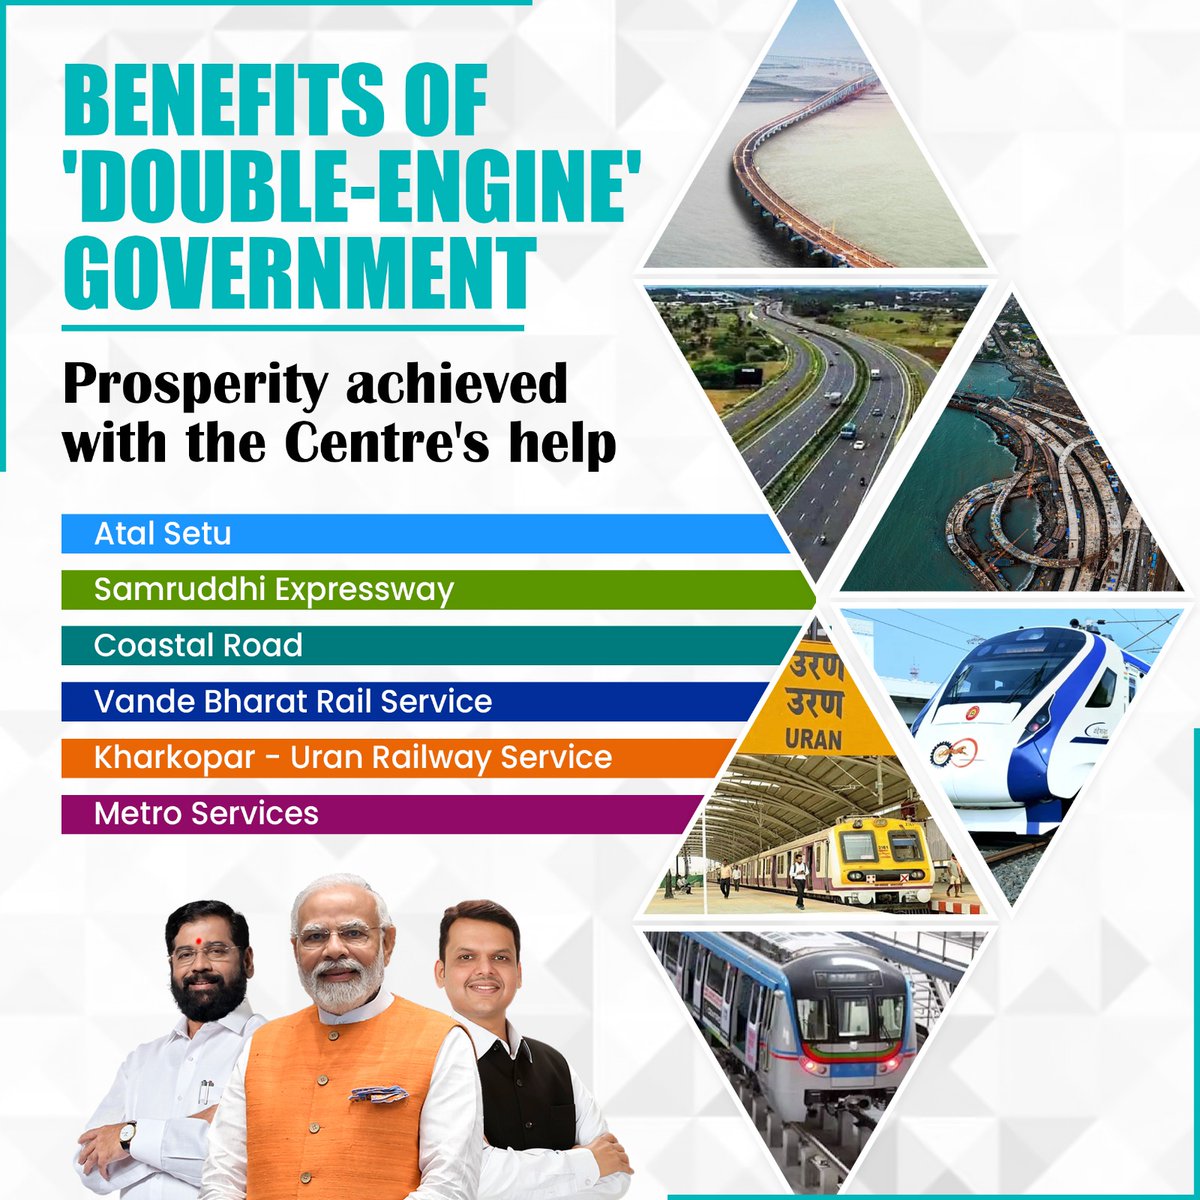 When the Centre and the state unite, progress knows no bounds! Kudos to PM Modi and CM Eknath Shinde for steering Maharashtra towards prosperity. From Atal Setu to Coastal Road, the 'Double-Engine' government is driving development at full throttle!